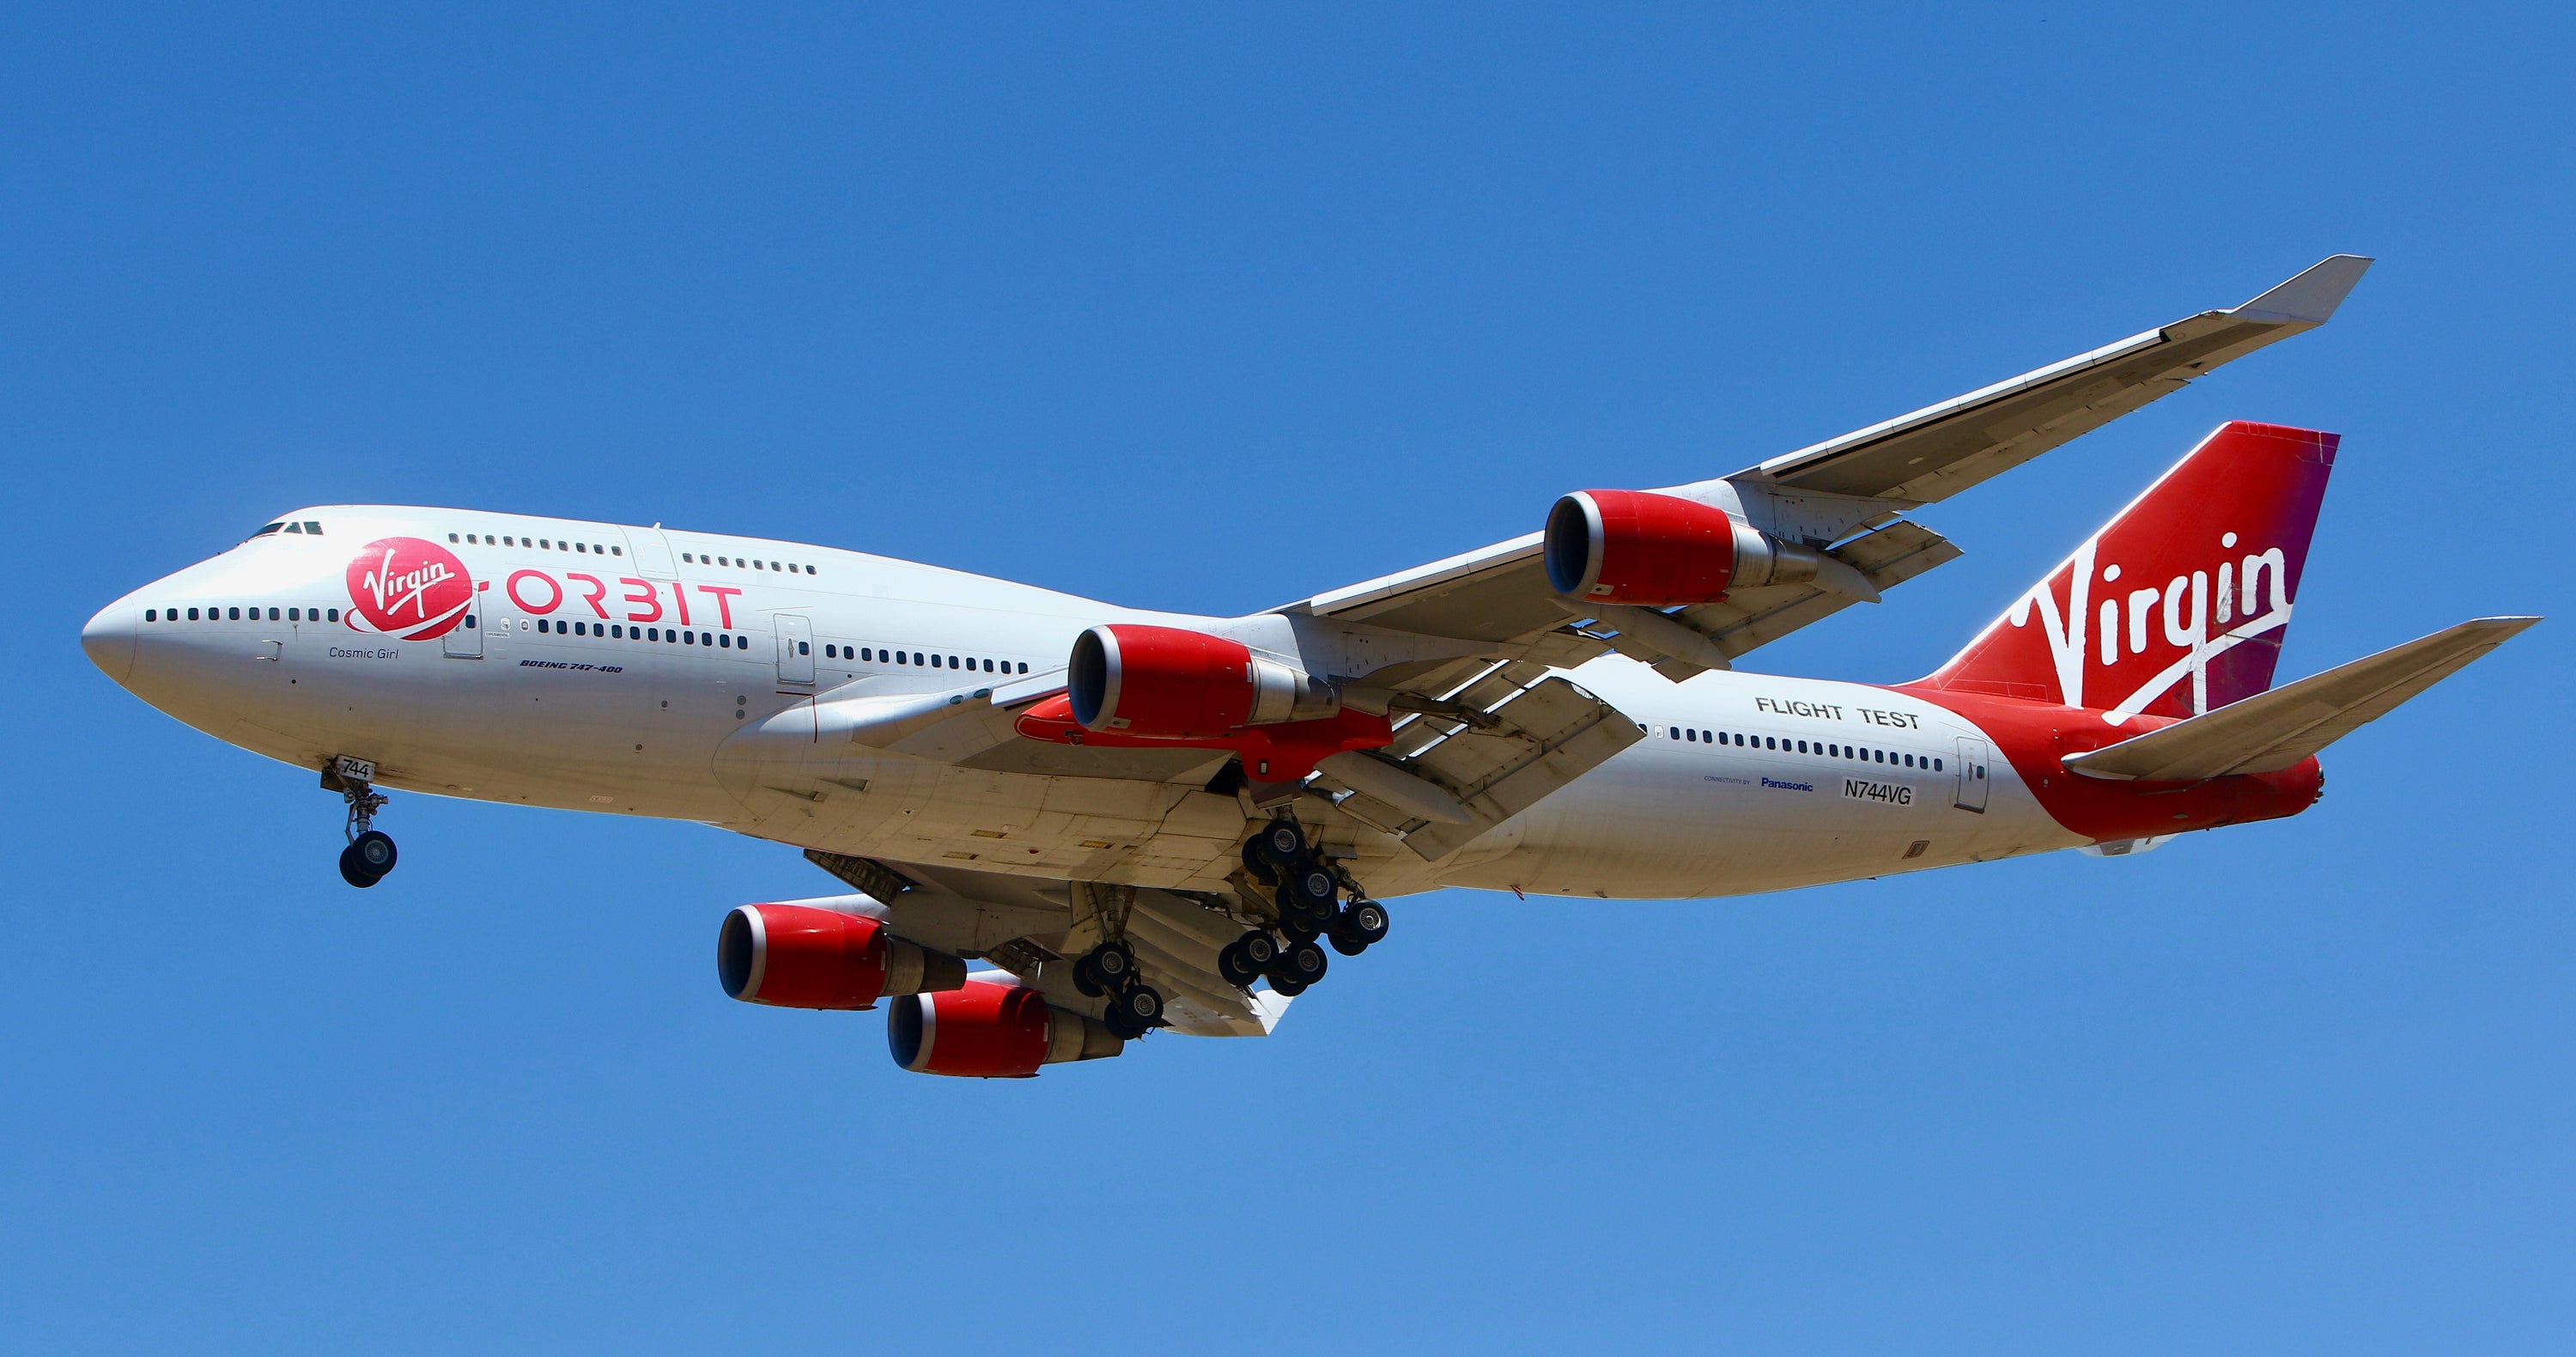 Virgin Atlantic aircraft ditched their bar services in 2019